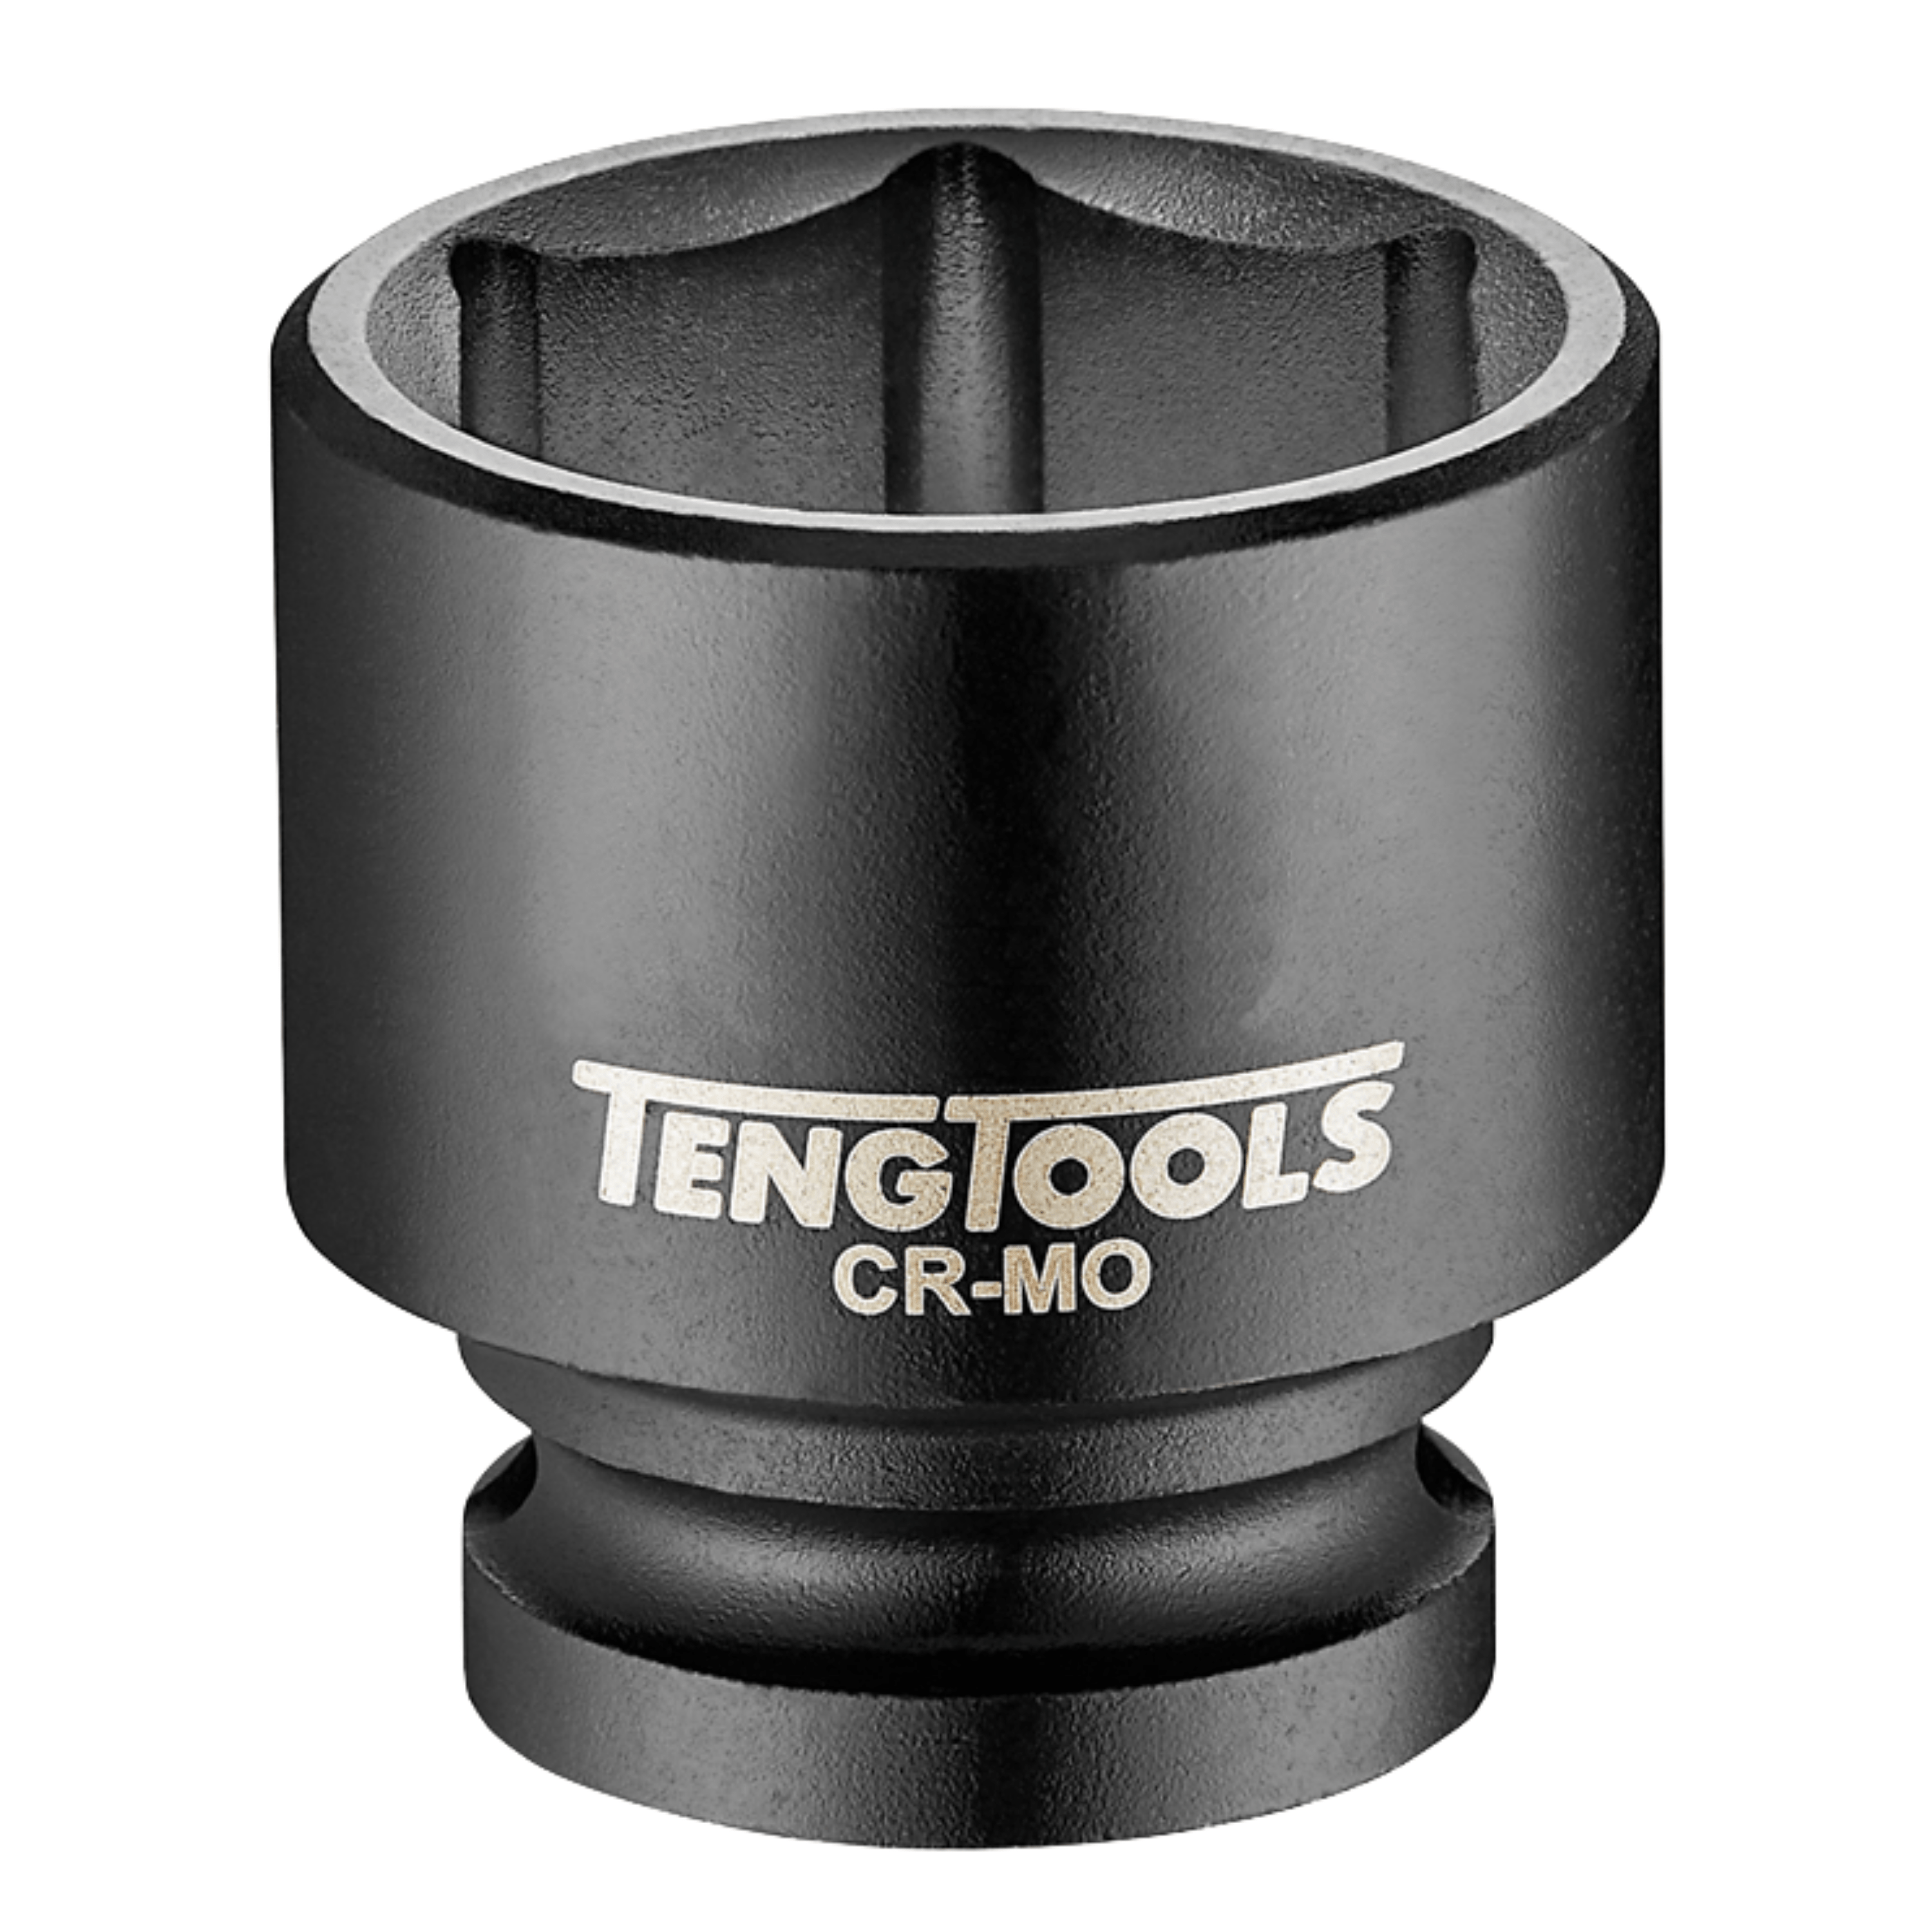 Teng Tools 1-1/2 Inch Drive 6 Point Metric Shallow Chrome Molybdenum Impact Sockets - 41mm